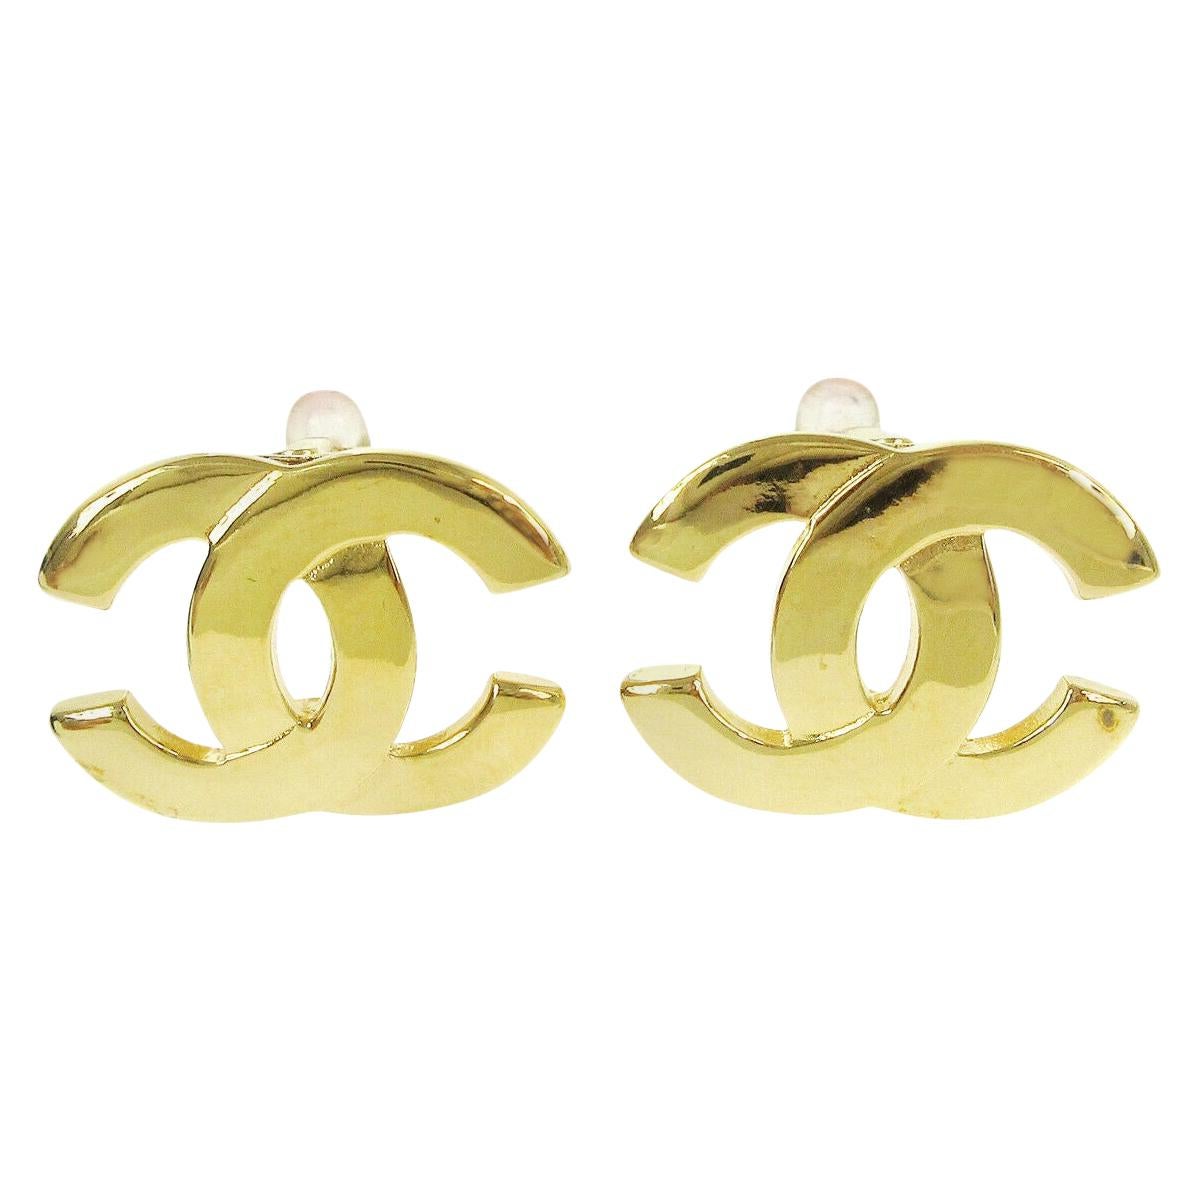 Chanel Gold Metal Logo Charm Small Logo Evening Stud Earrings in Box